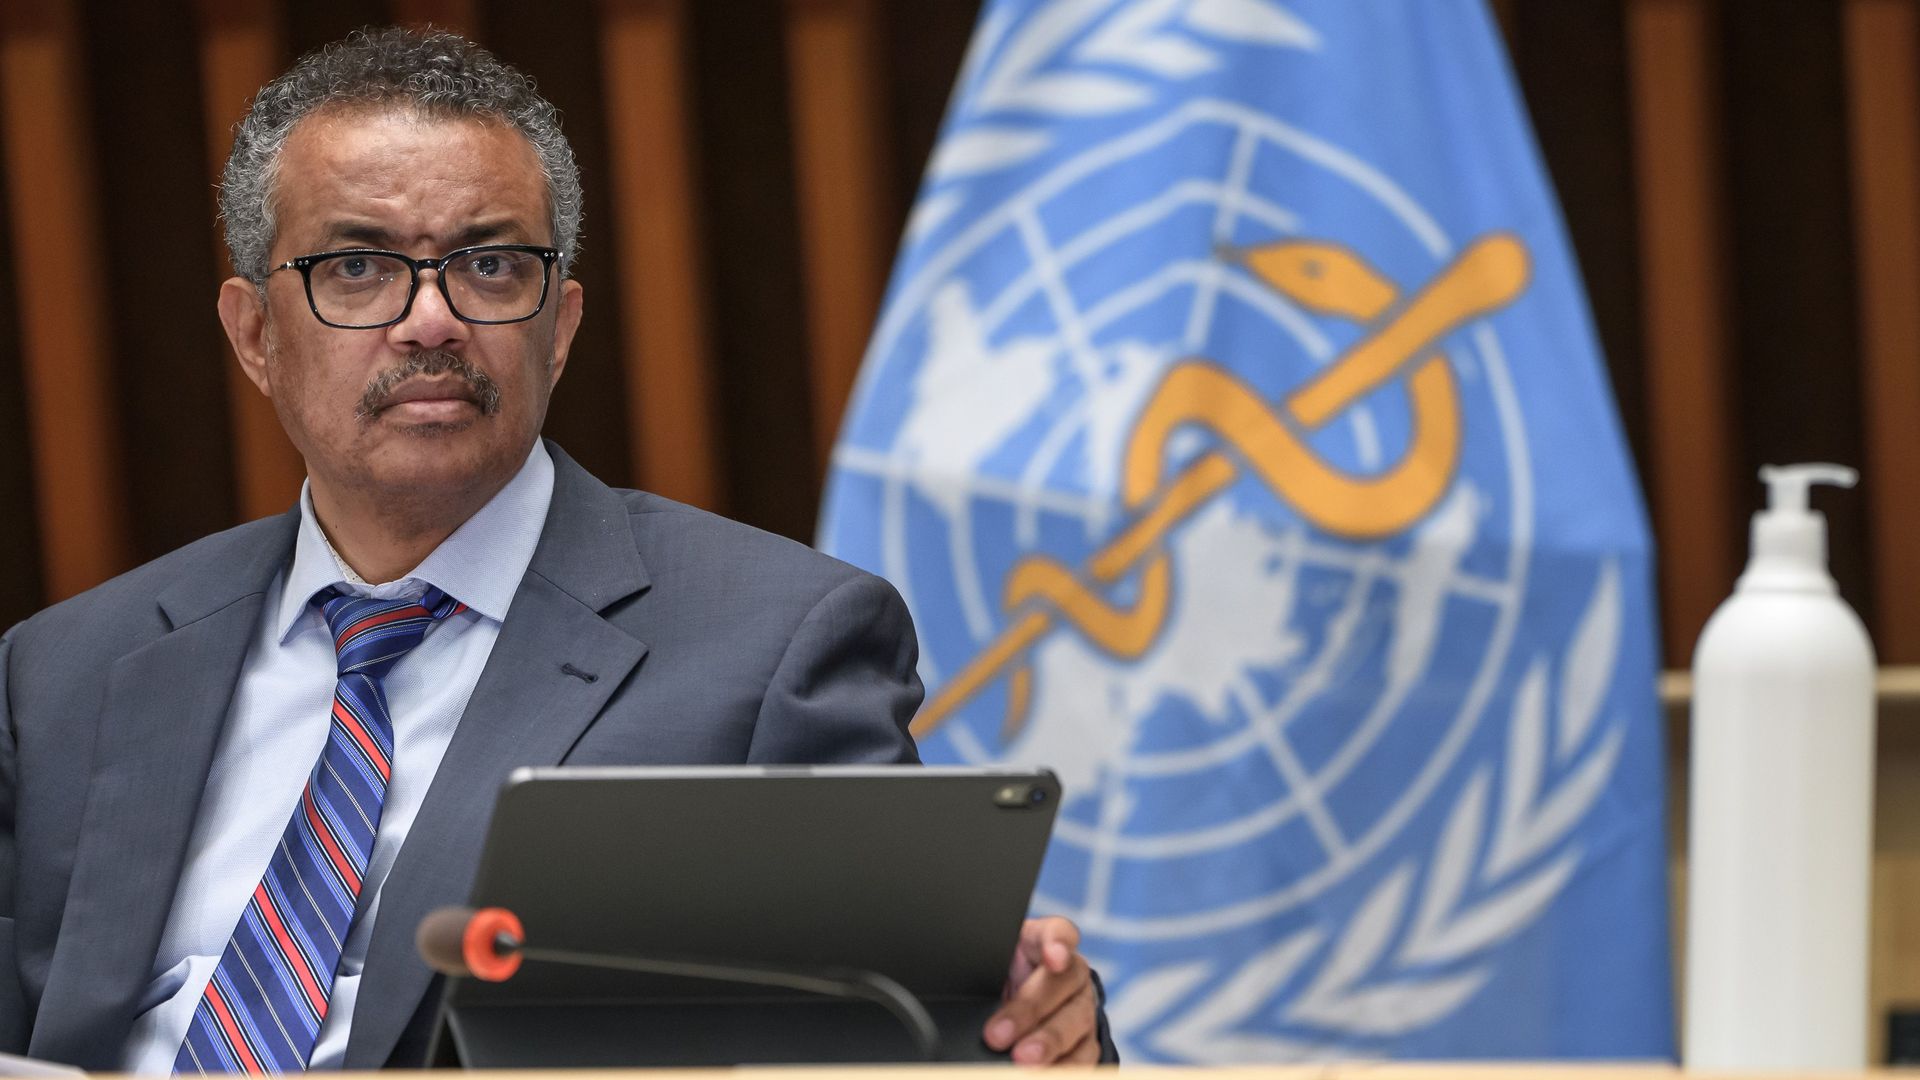 World Health Organization (WHO) Director-General Tedros Adhanom Ghebreyesus attends a press conference  on July 3, 2020 at the WHO headquarters in Geneva.